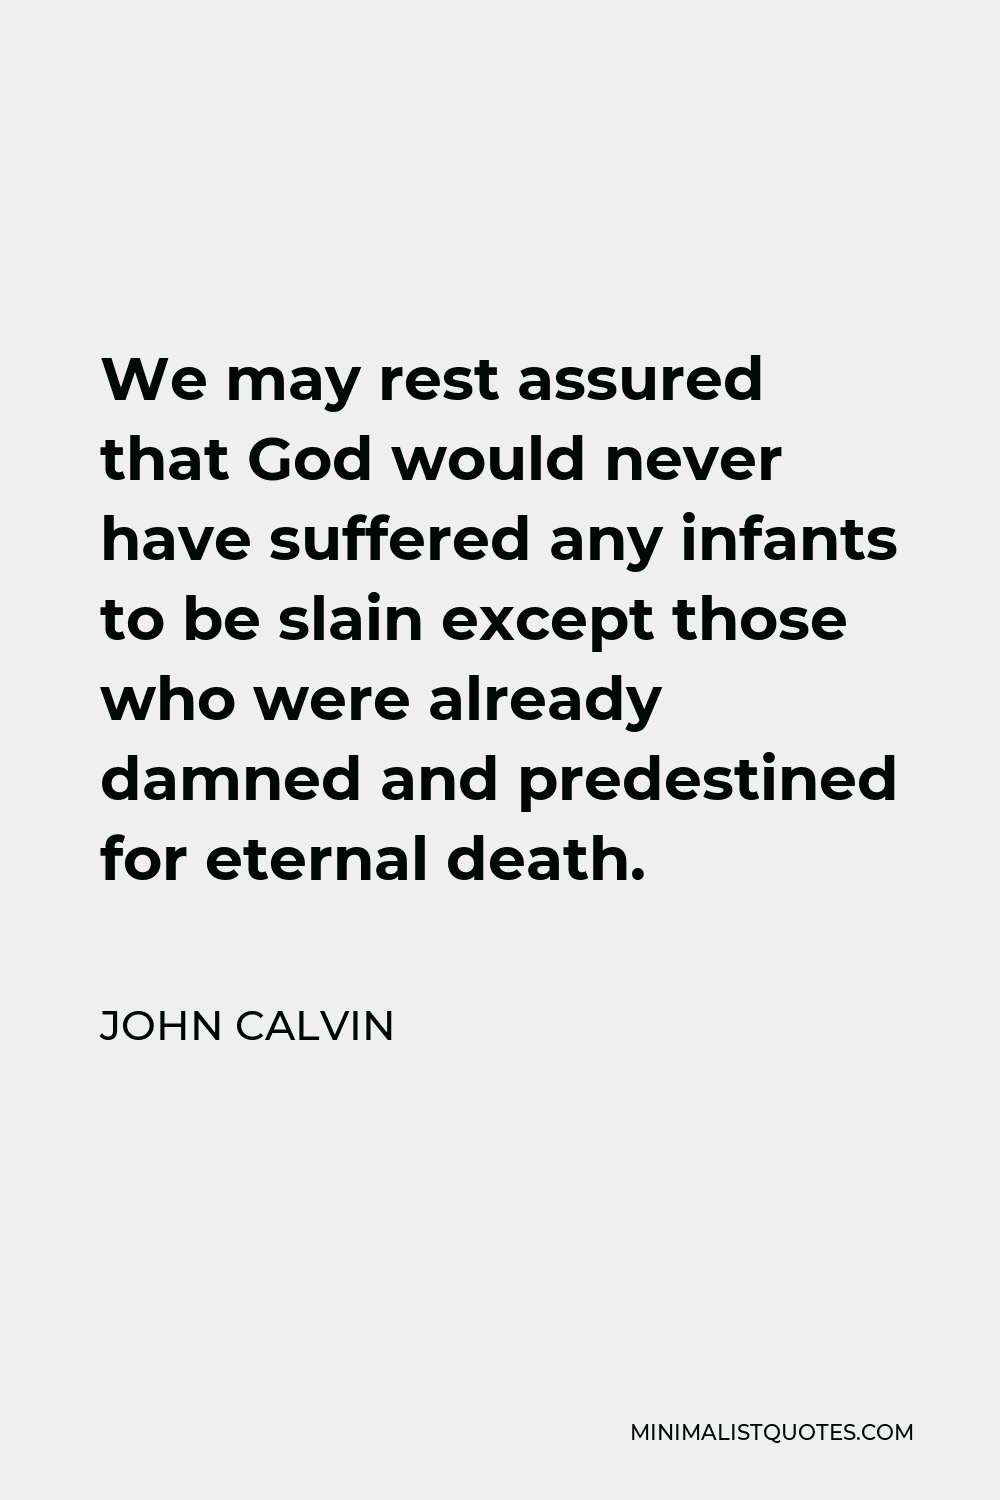 John Calvin Quote: We may rest assured that God would never have ... John Calvin Predestination